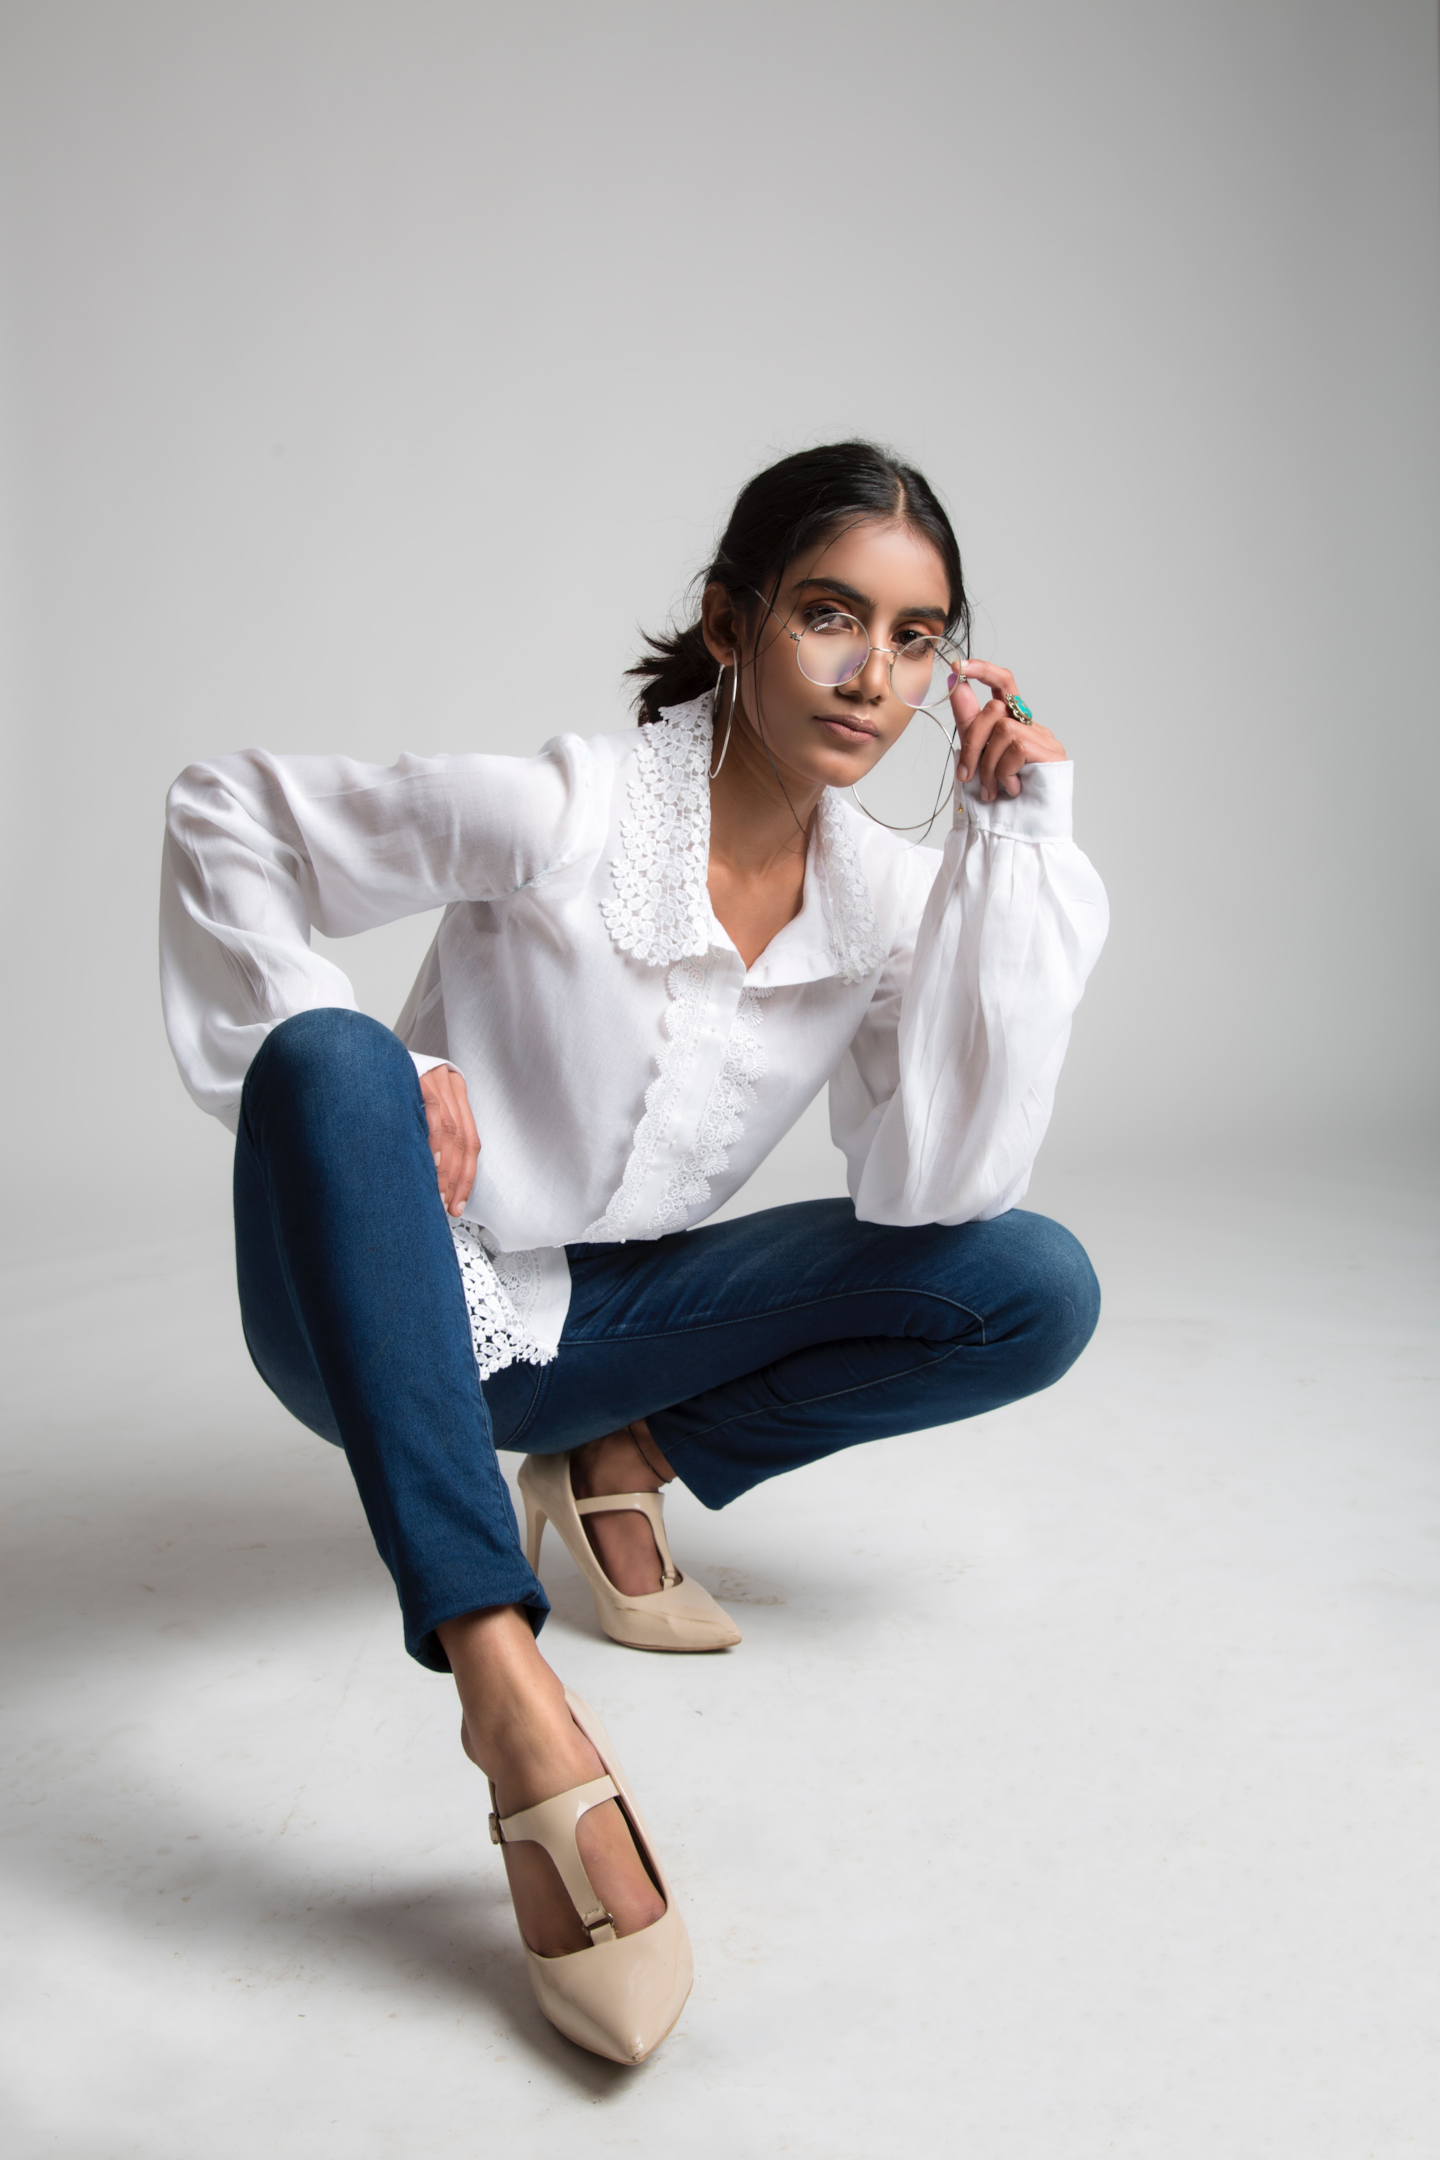 The casual combination of white shirt and jeans is elevated with luxury fashion pieces. | Photo by Anubhaw Anand via Pexels